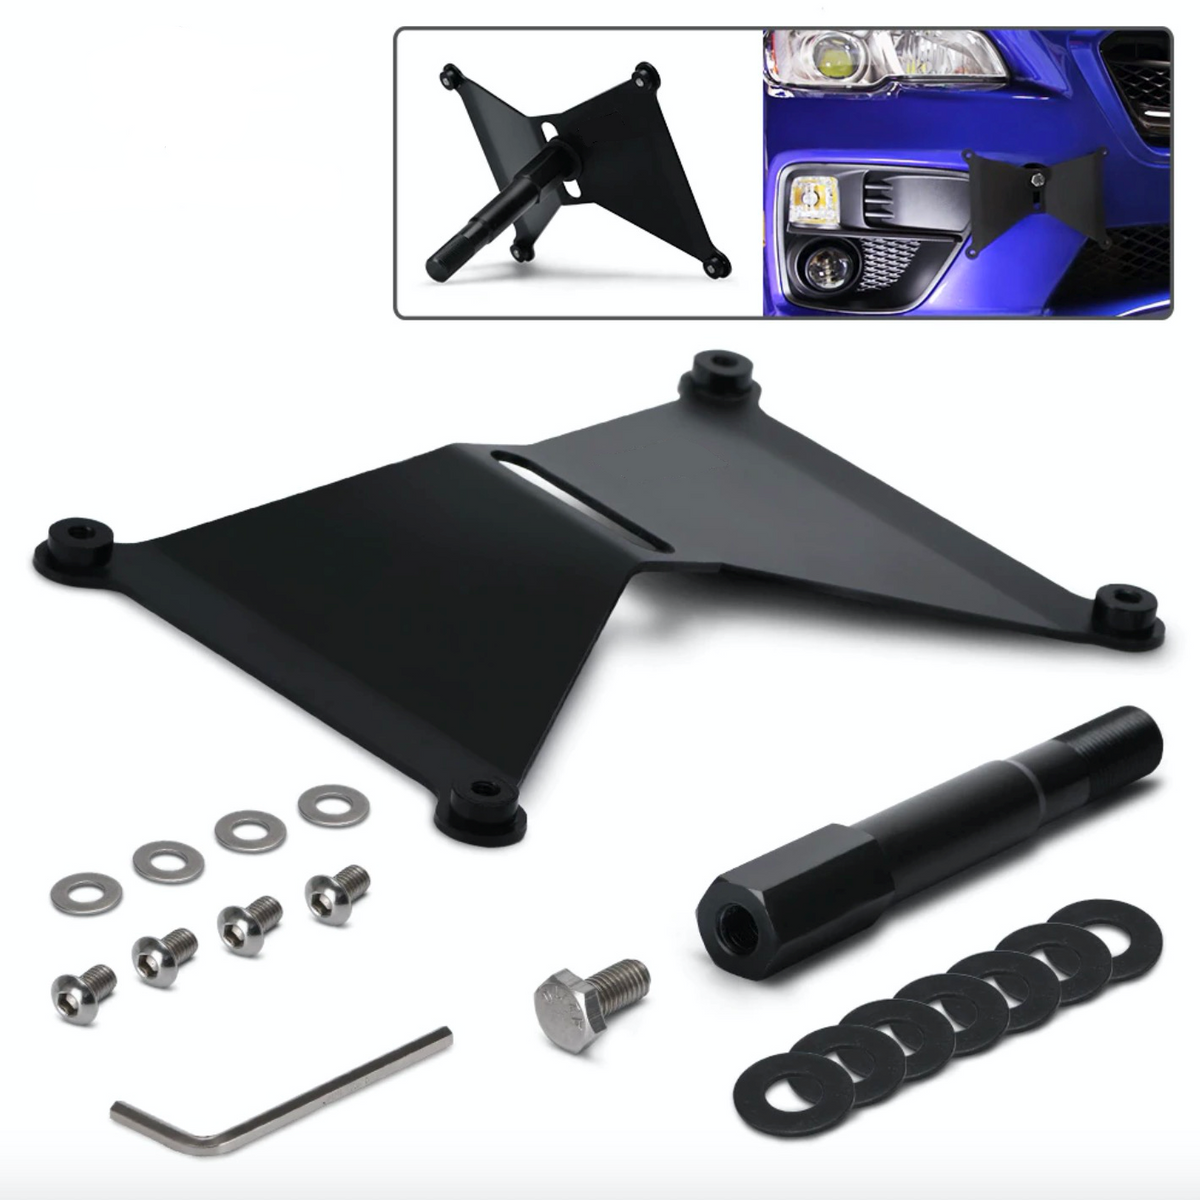  for 2010-2014 Subaru Legacy - Front Bumper Tow Hook License  Plate RELOCATOR Kit Relocation Bracket Adaptor Mount Holder : Automotive